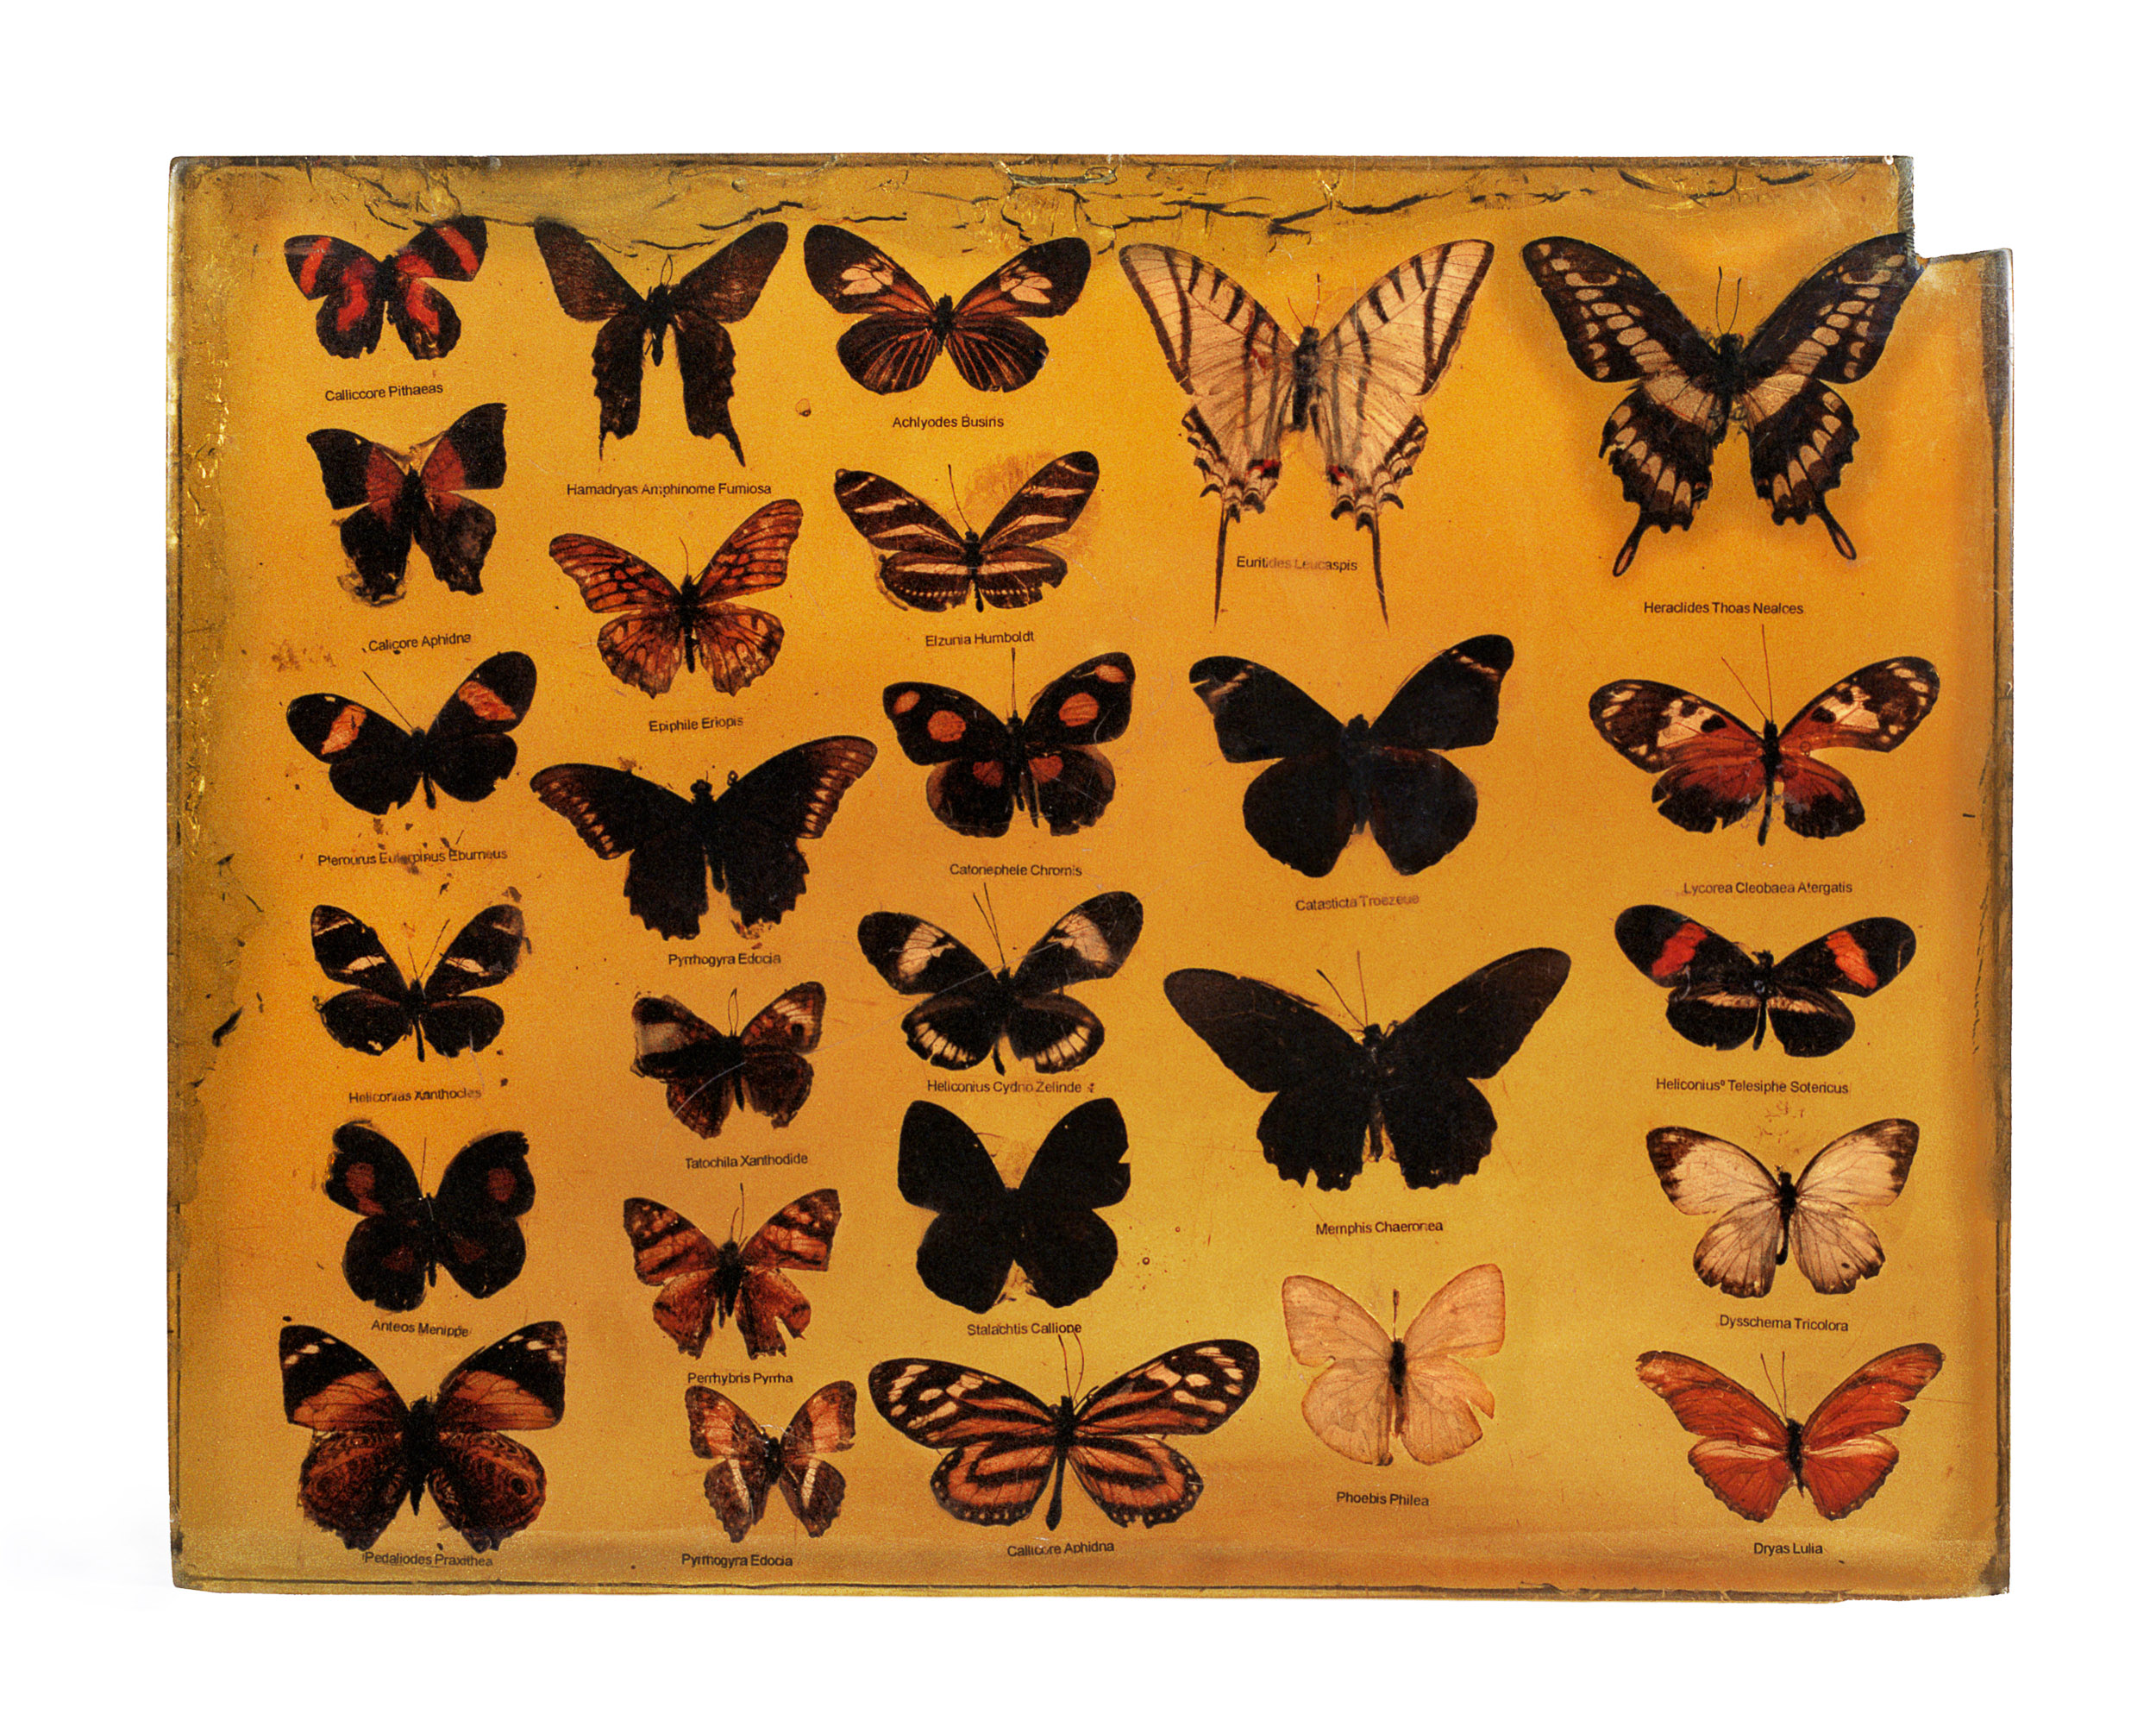 Butterfly collection in crystallized cocaine block